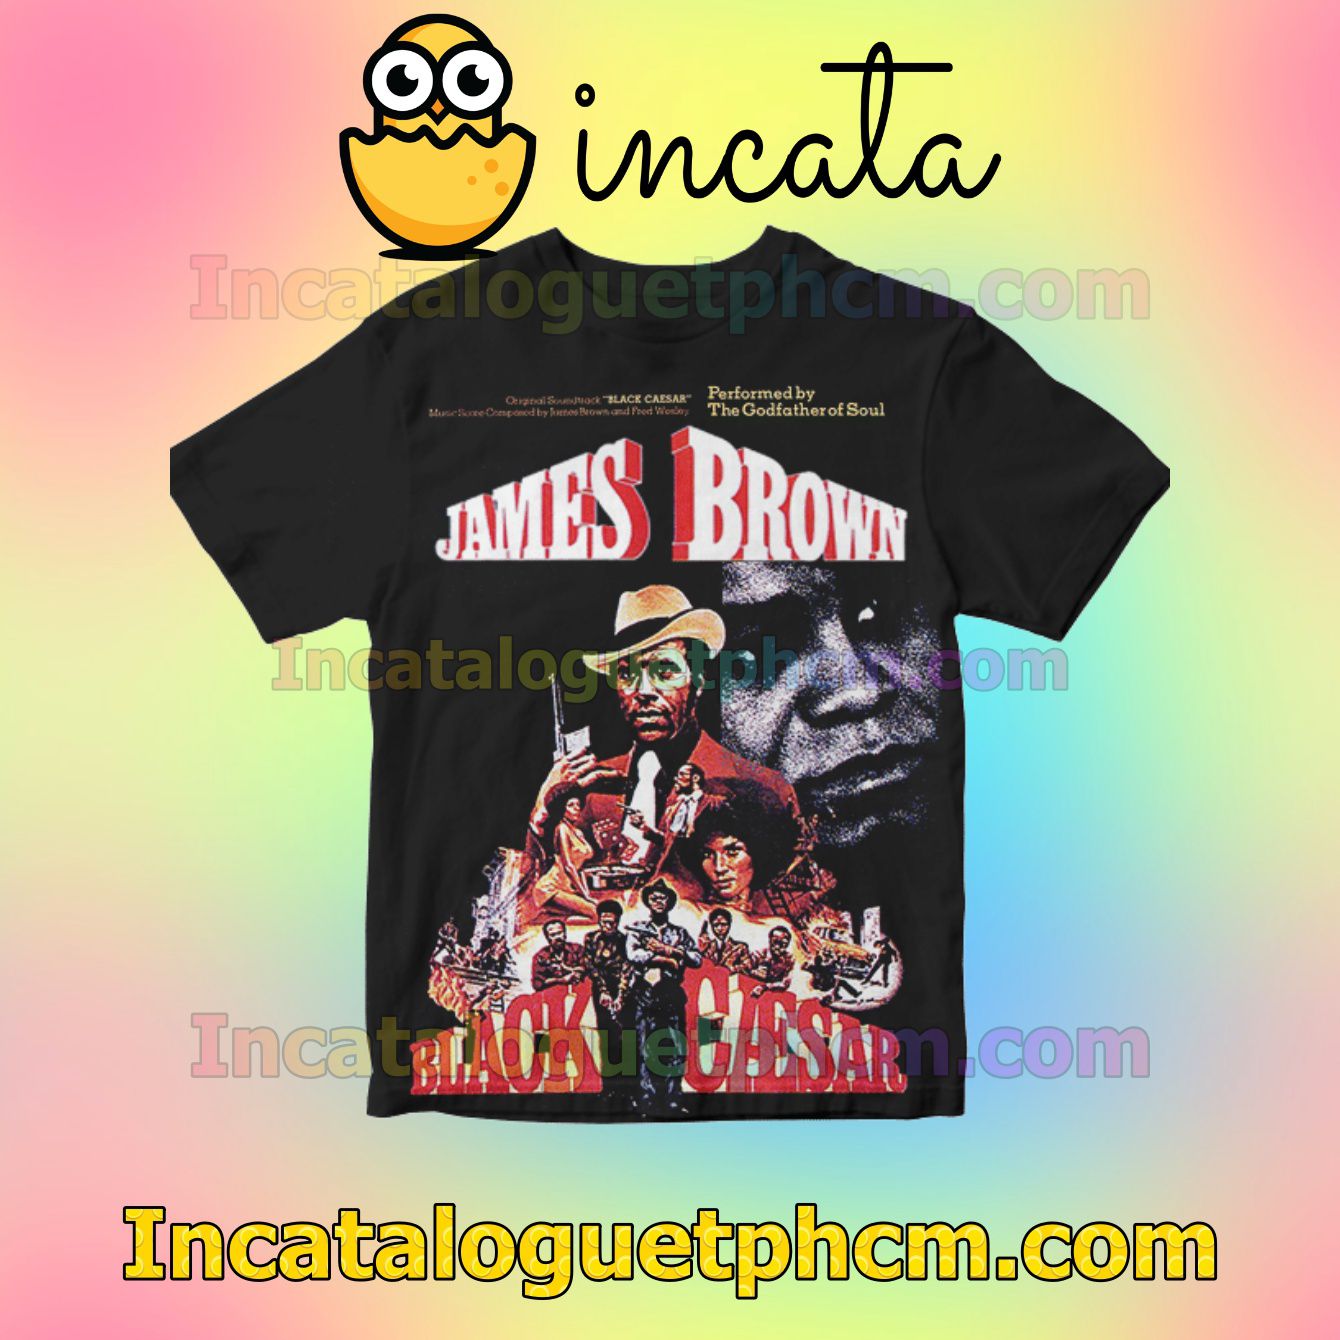 James Brown Black Caesar Album Cover For Fan Personalized T-Shirt